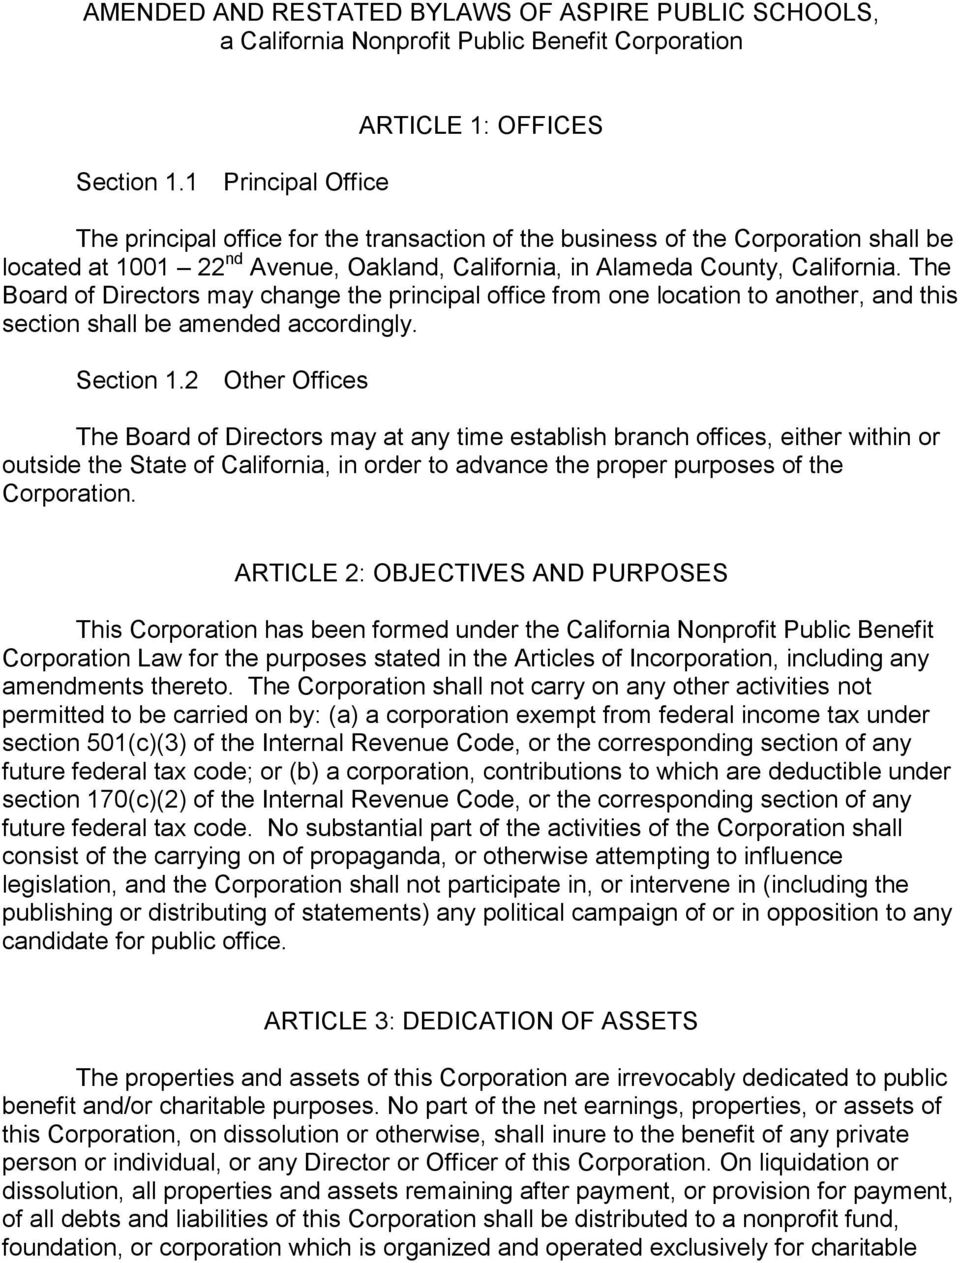 California. The Board of Directors may change the principal office from one location to another, and this section shall be amended accordingly. Section 1.